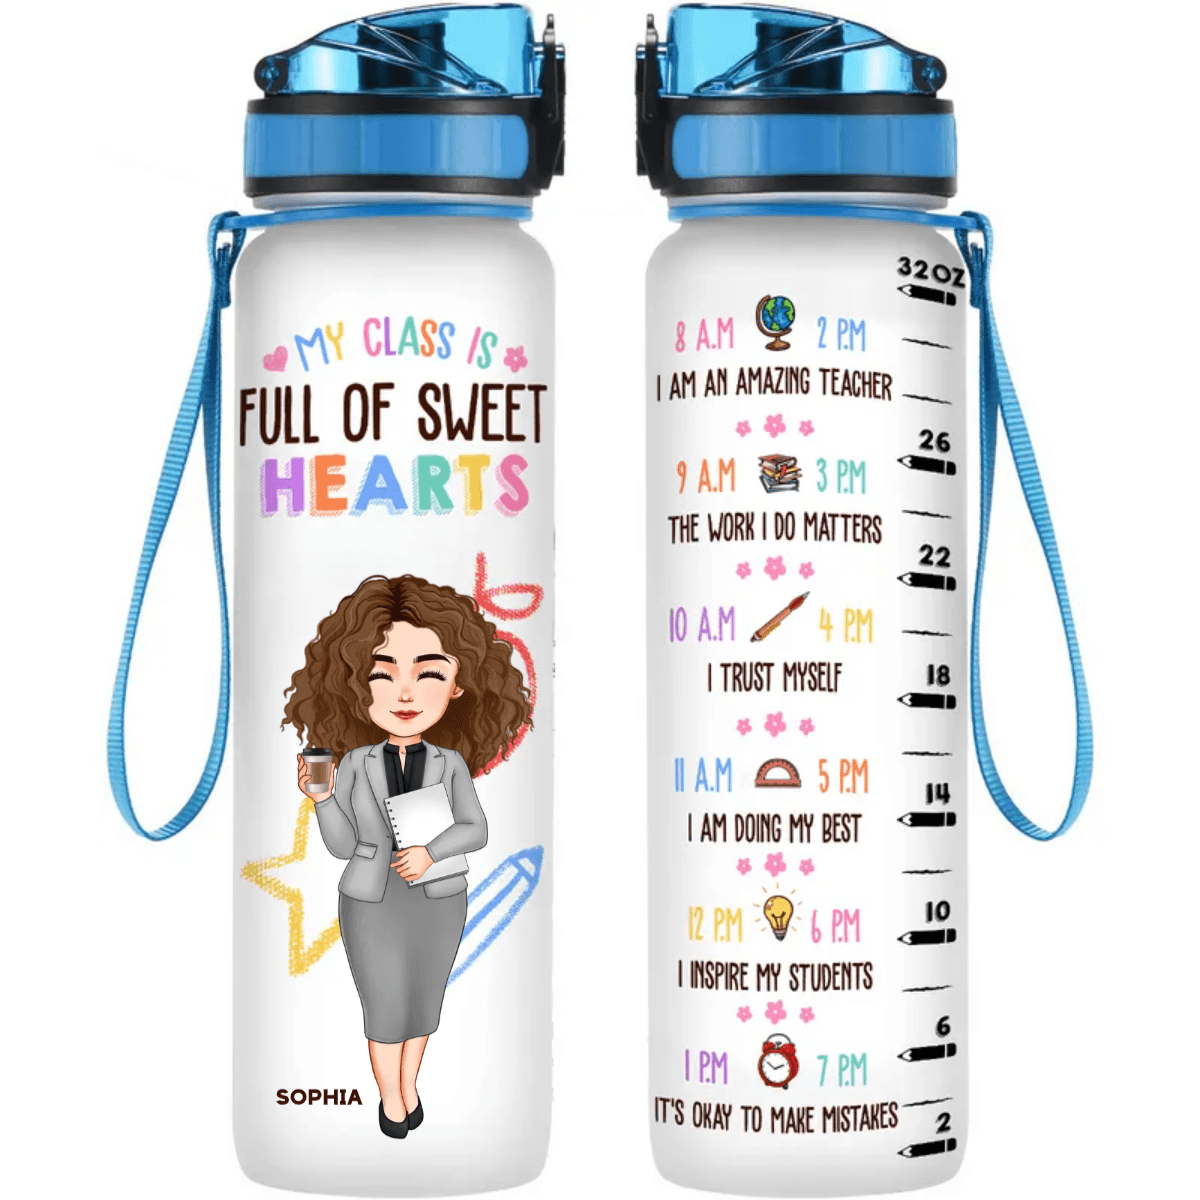 My Class Is Full Of Sweet Hearts - Personalized Water Bottle With Time Marker - Back To School Gift For Teacher, Educator